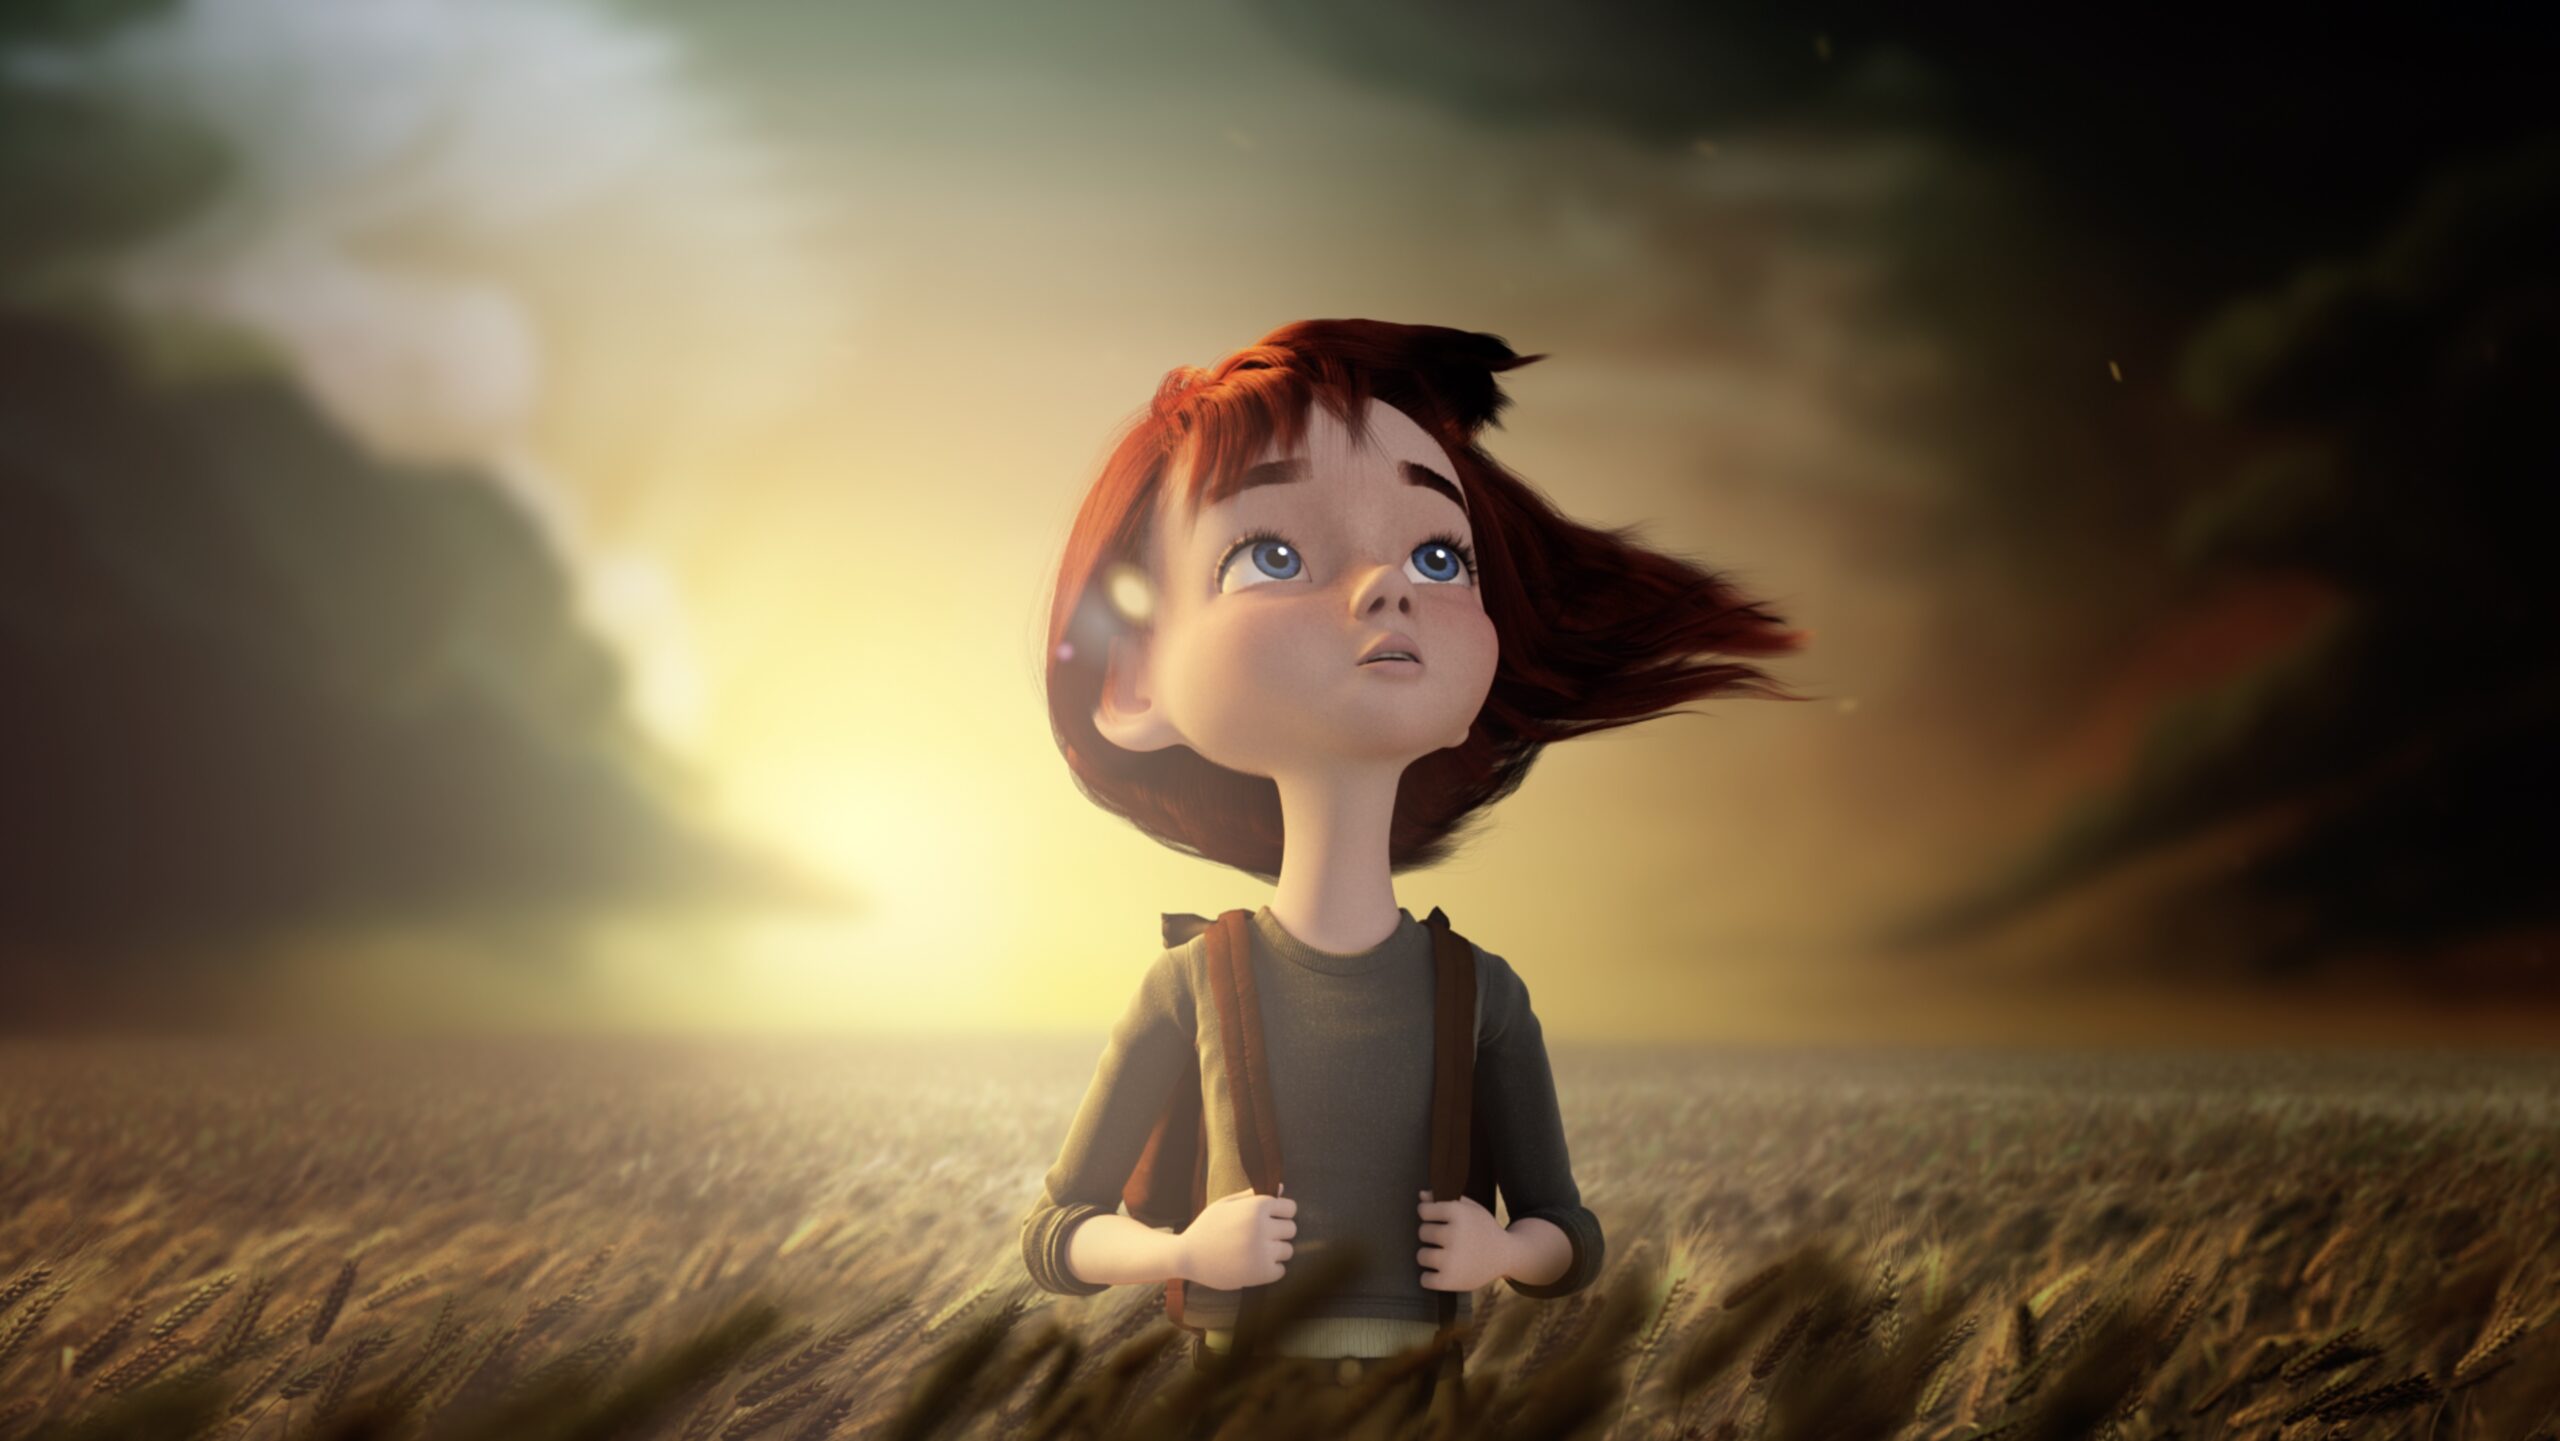 Main character Gemma in the middle of the fields of the new Nullaboo Hullabaloo teaser trailer